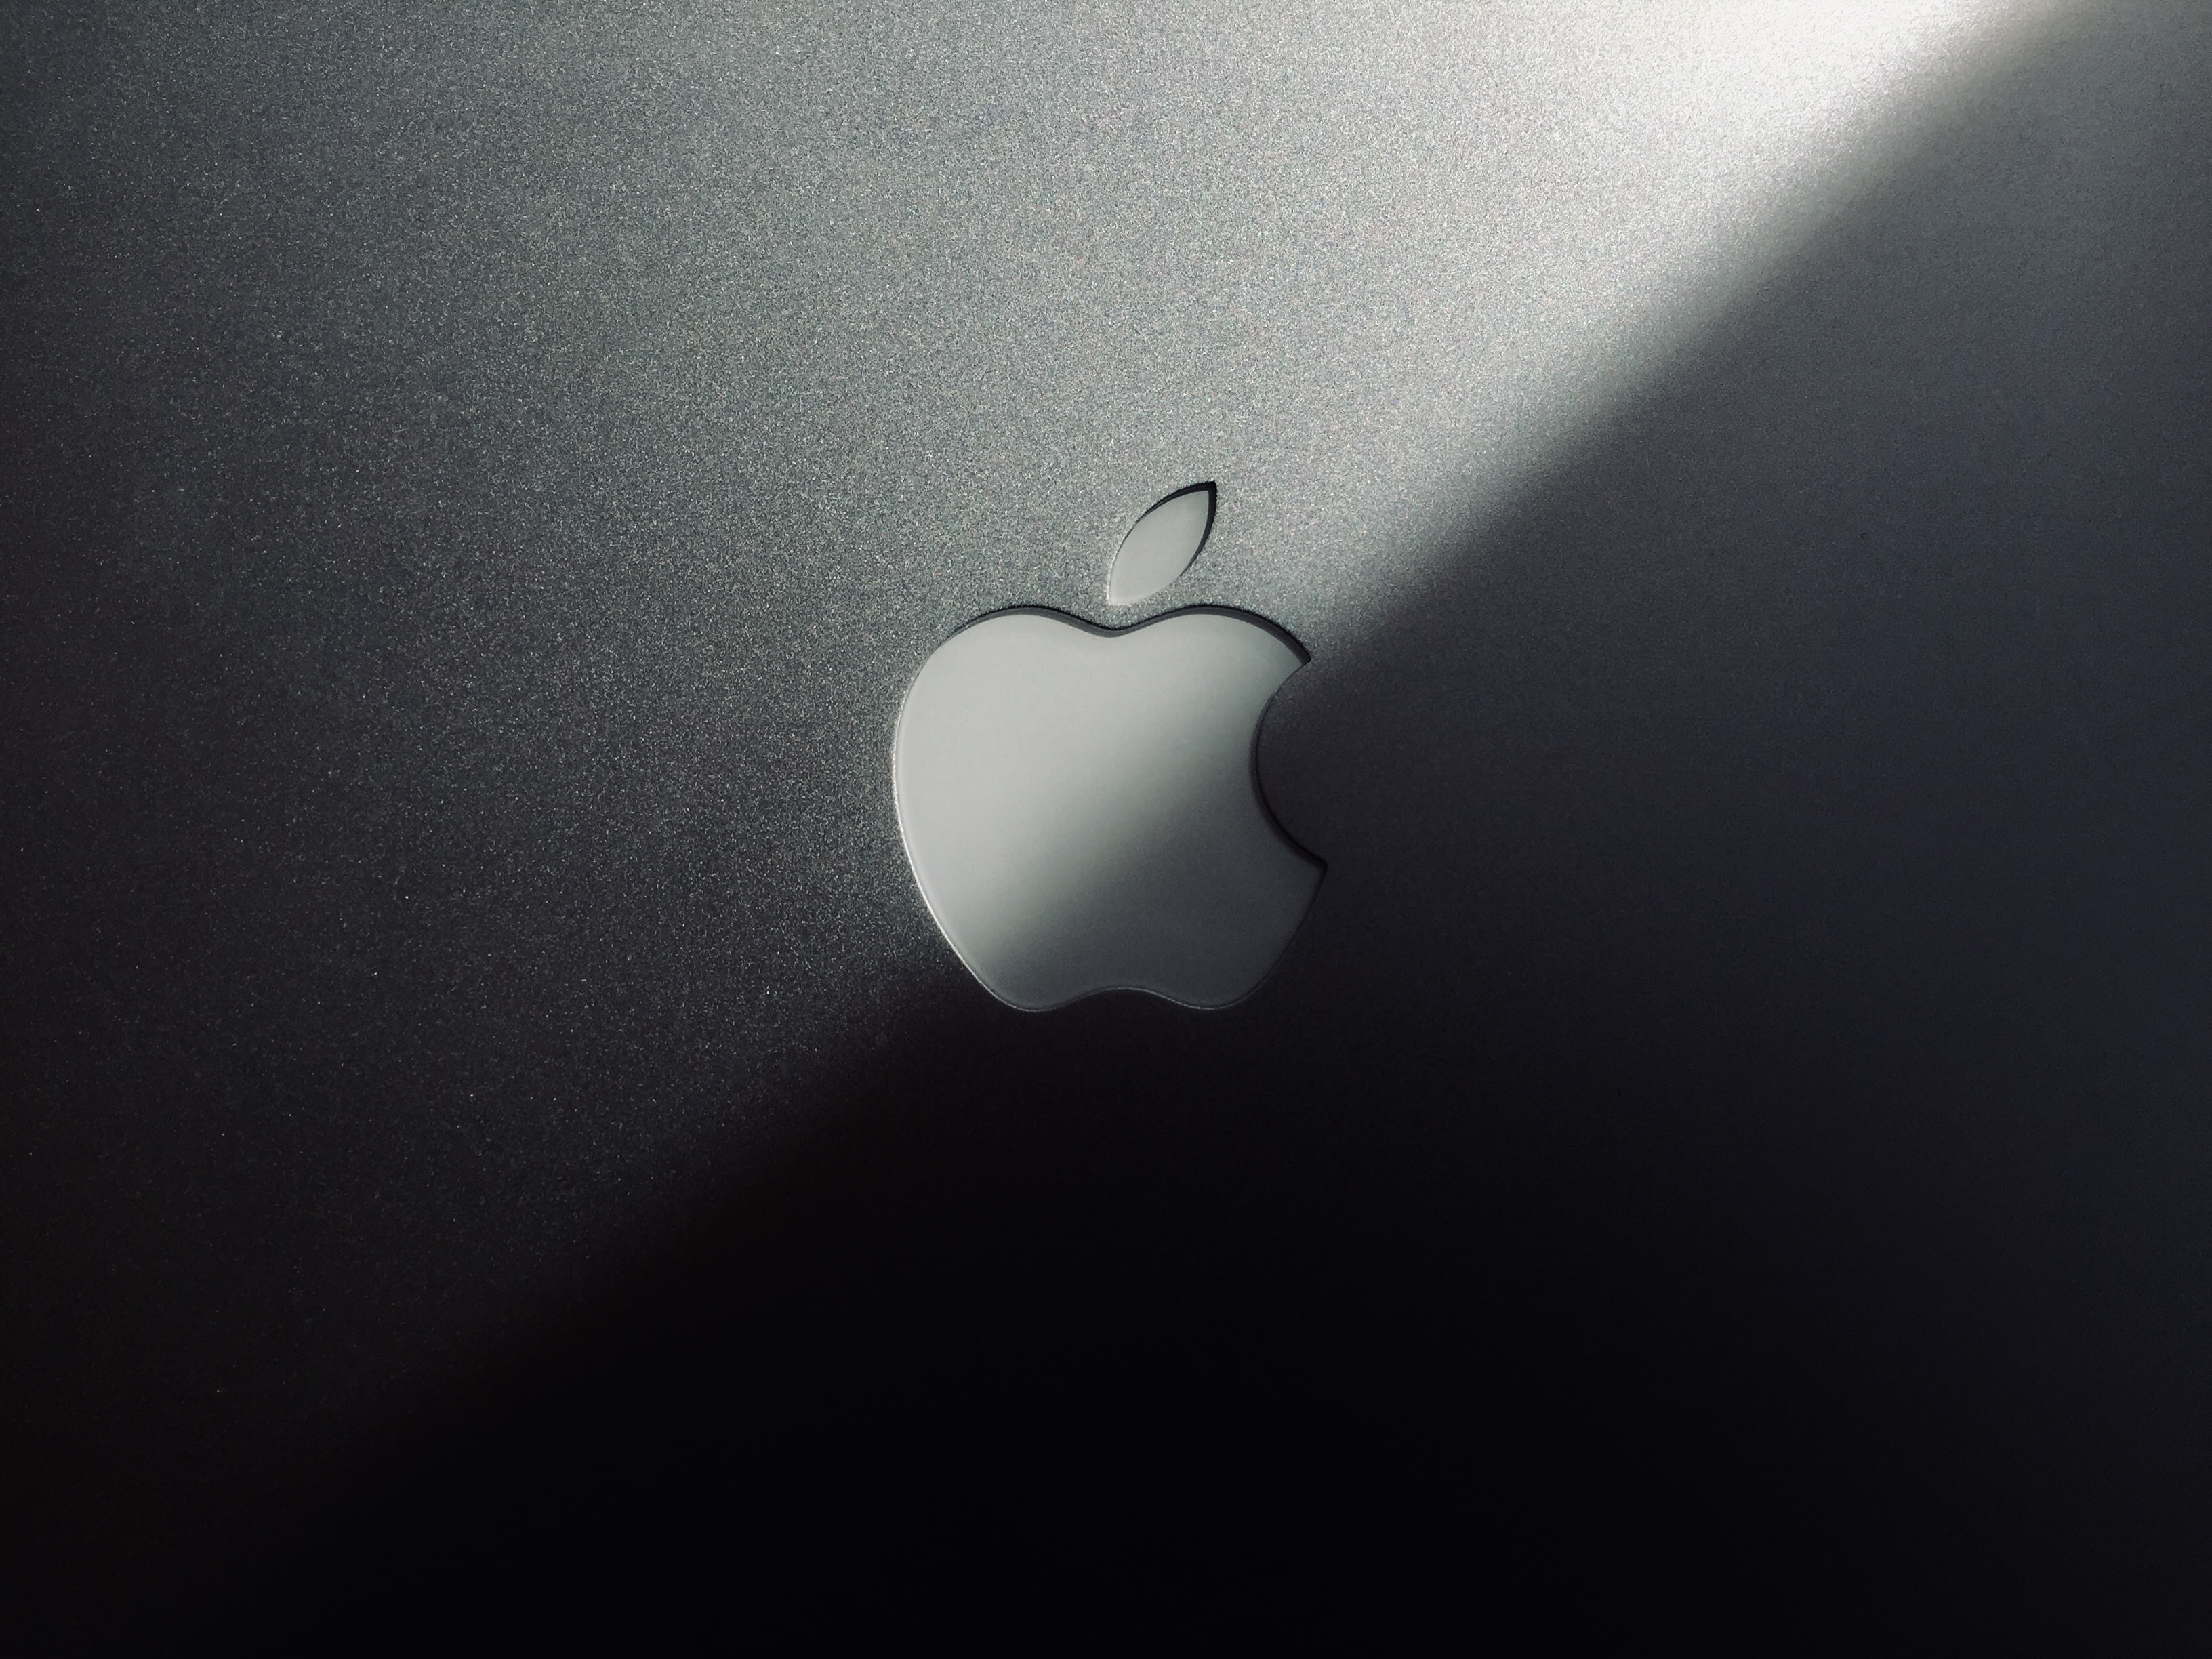 Black and white photograph of Apple's logo